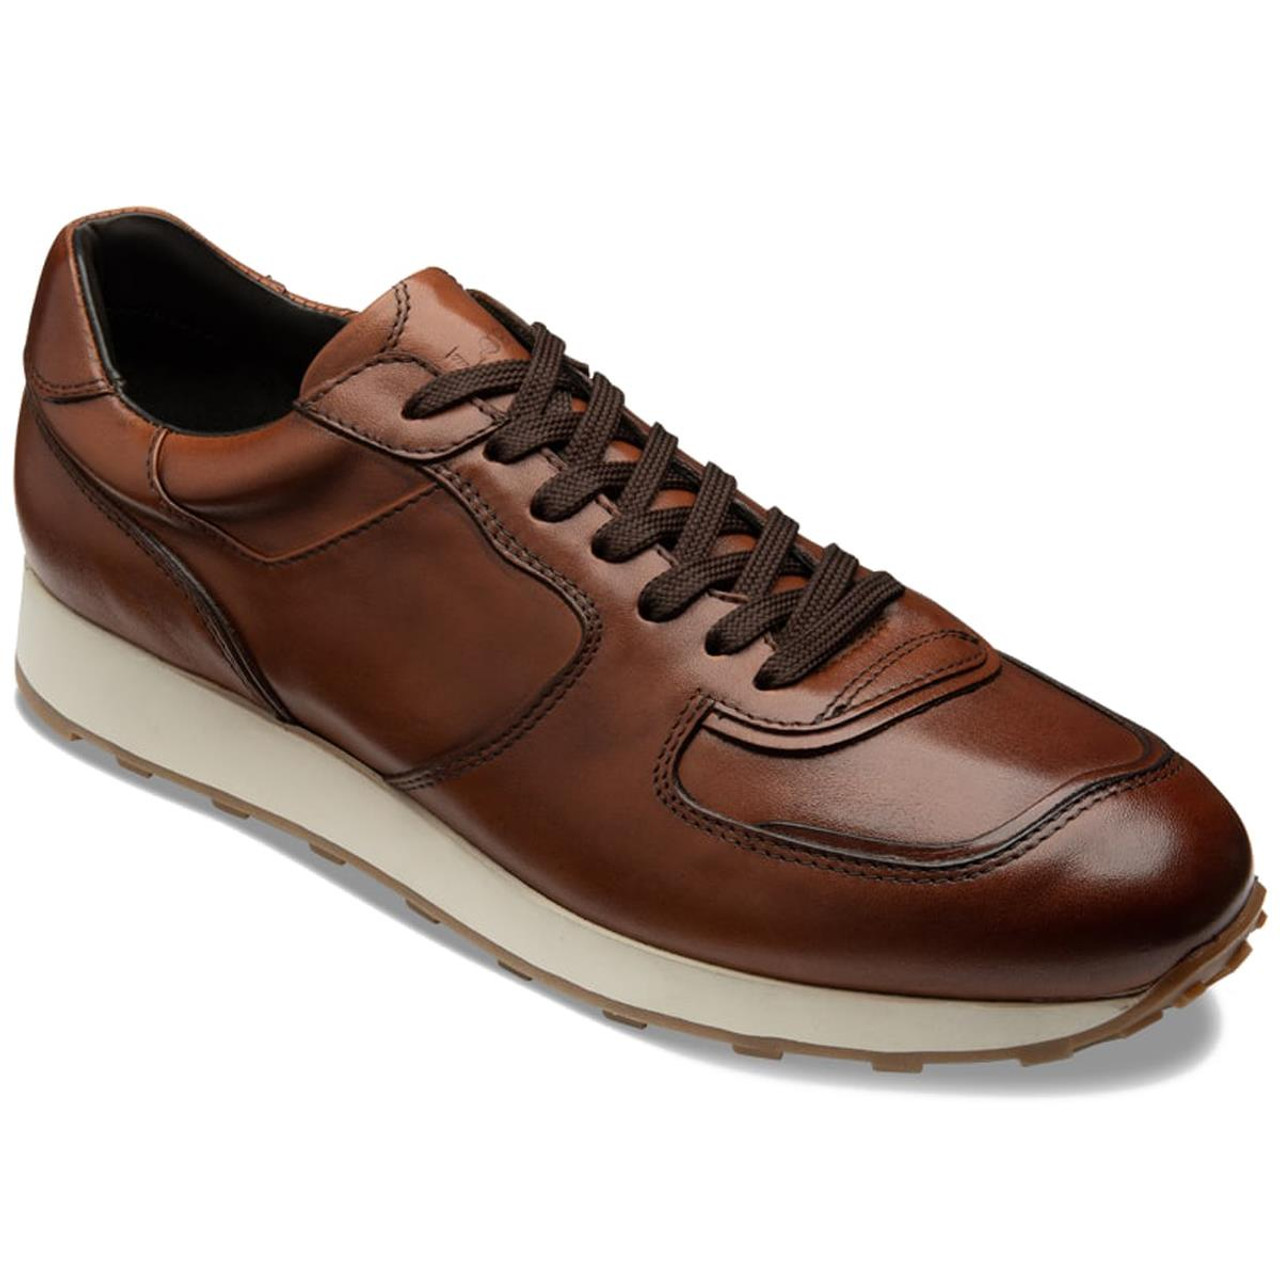 What is the fitting of the Loake trainers?